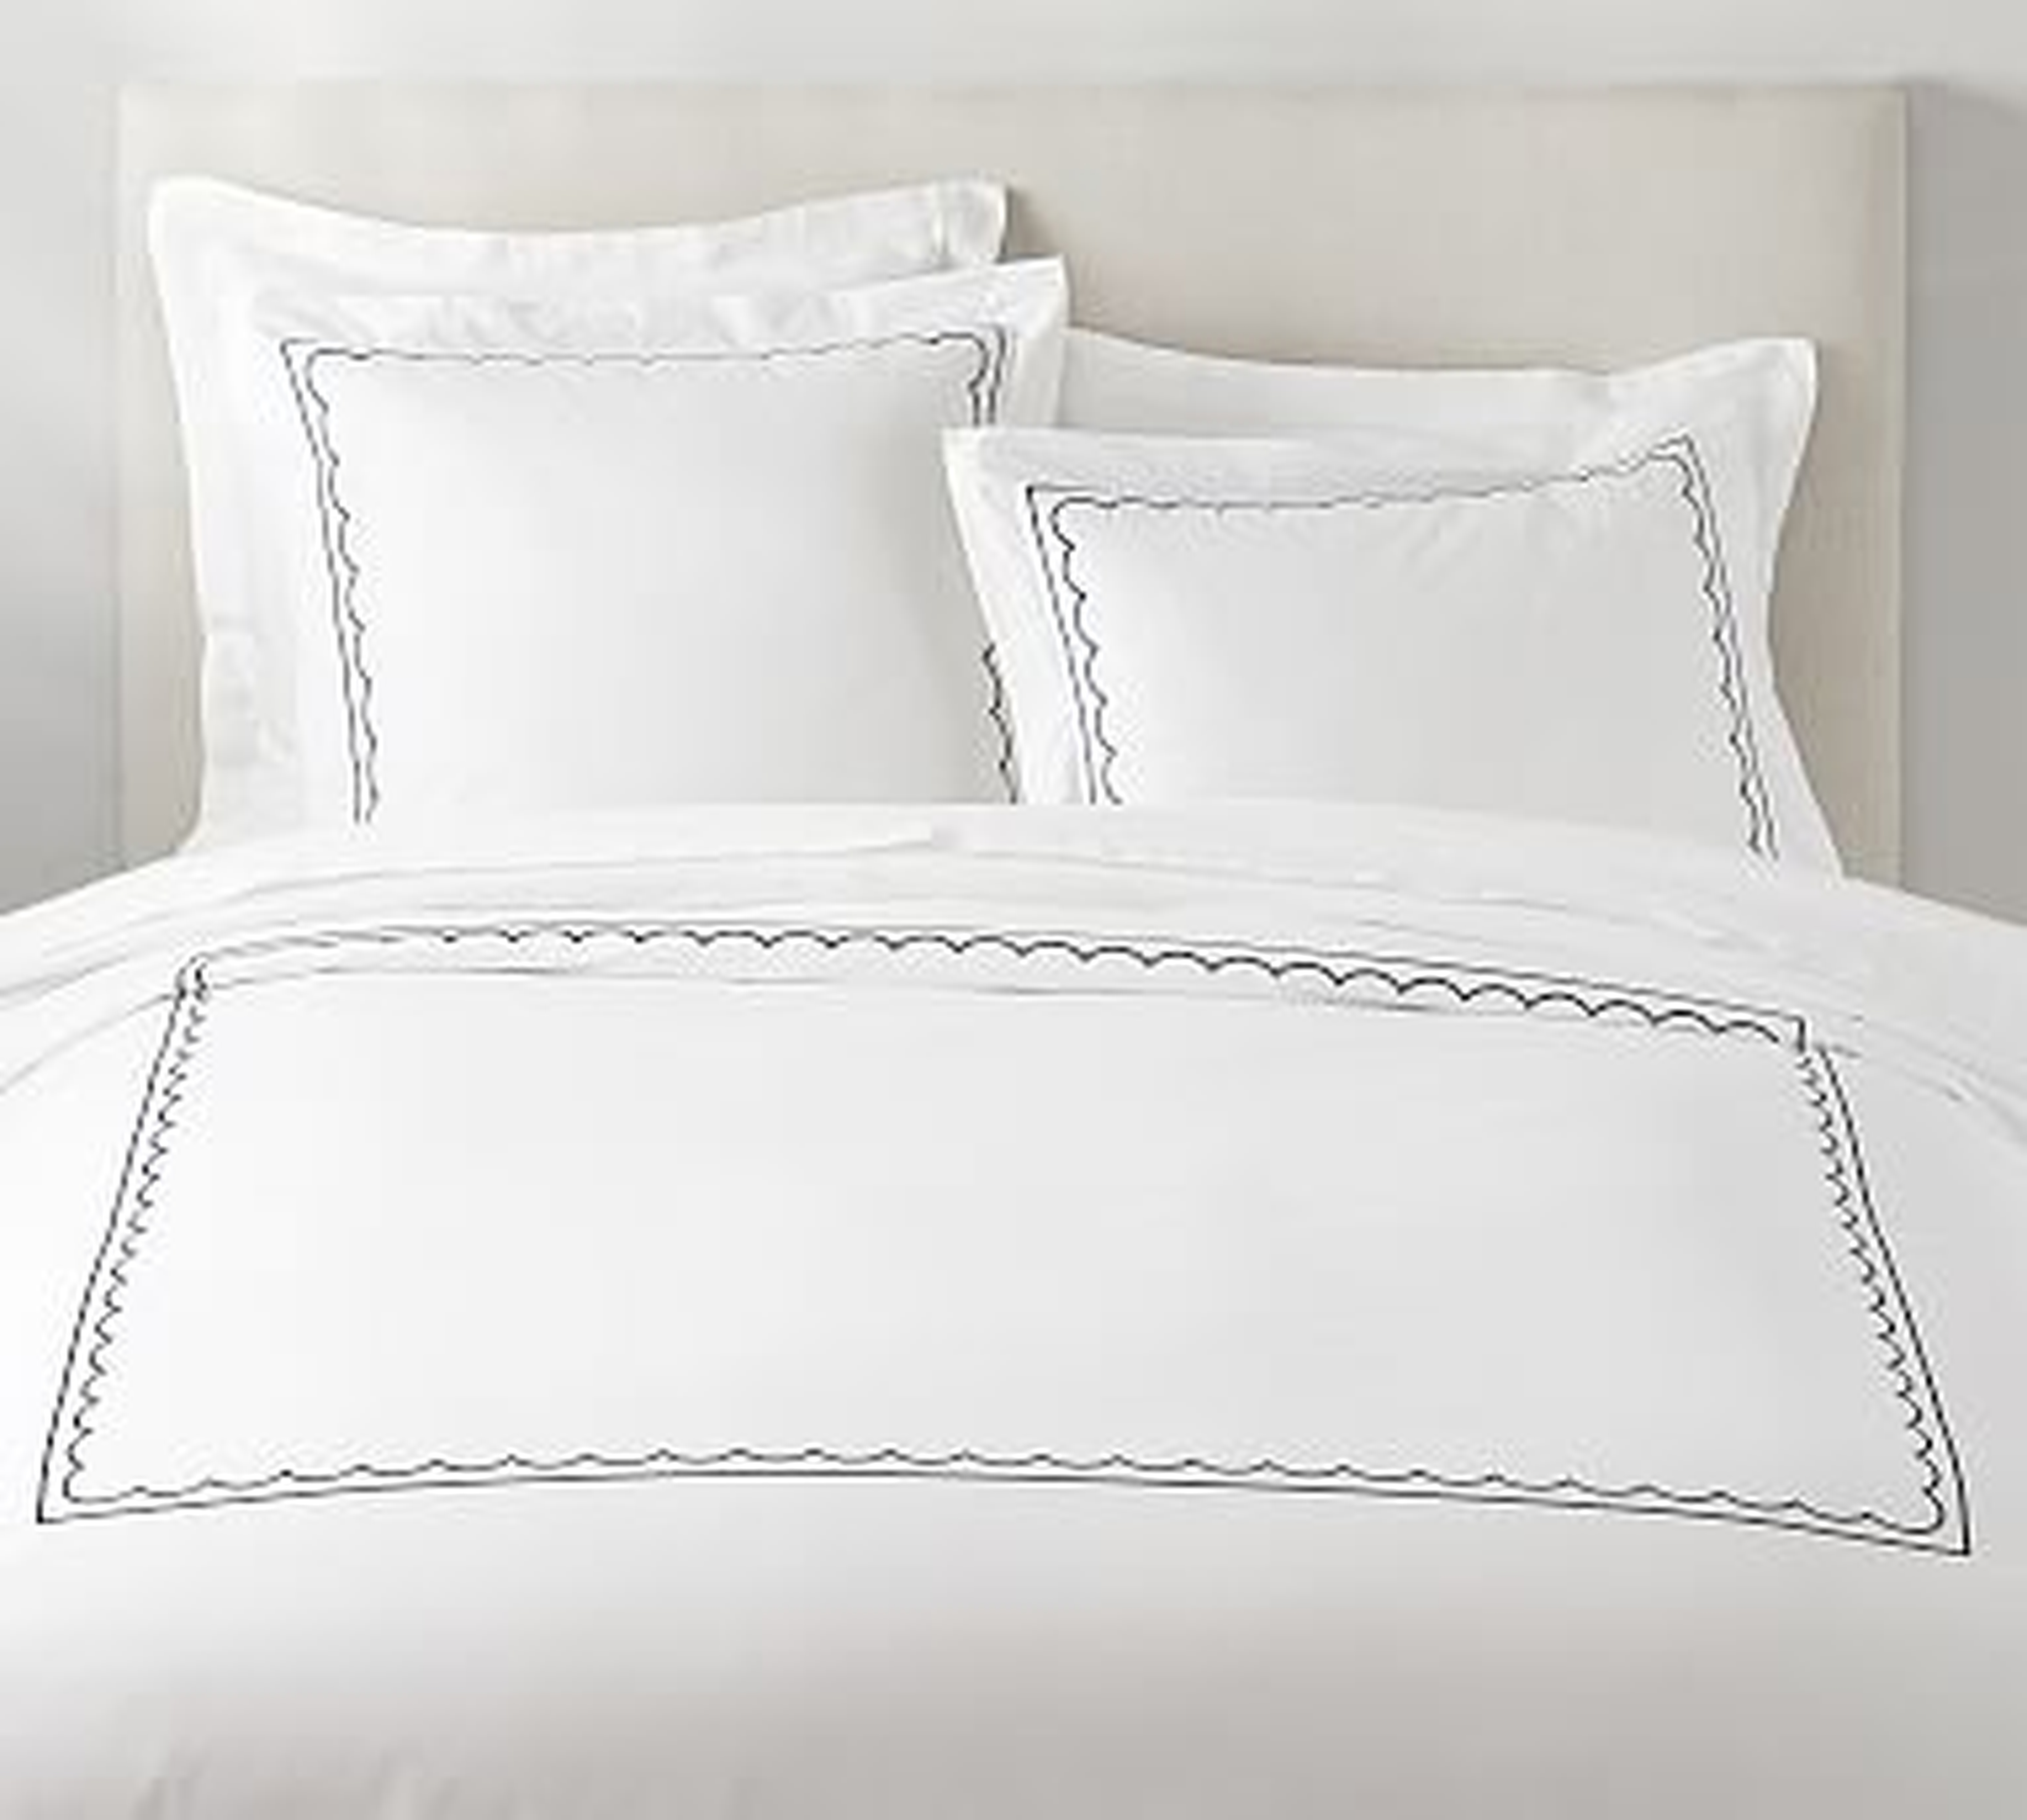 Scallop Border Embroidered Organic Duvet Cover, Twin, Midnight - Pottery Barn